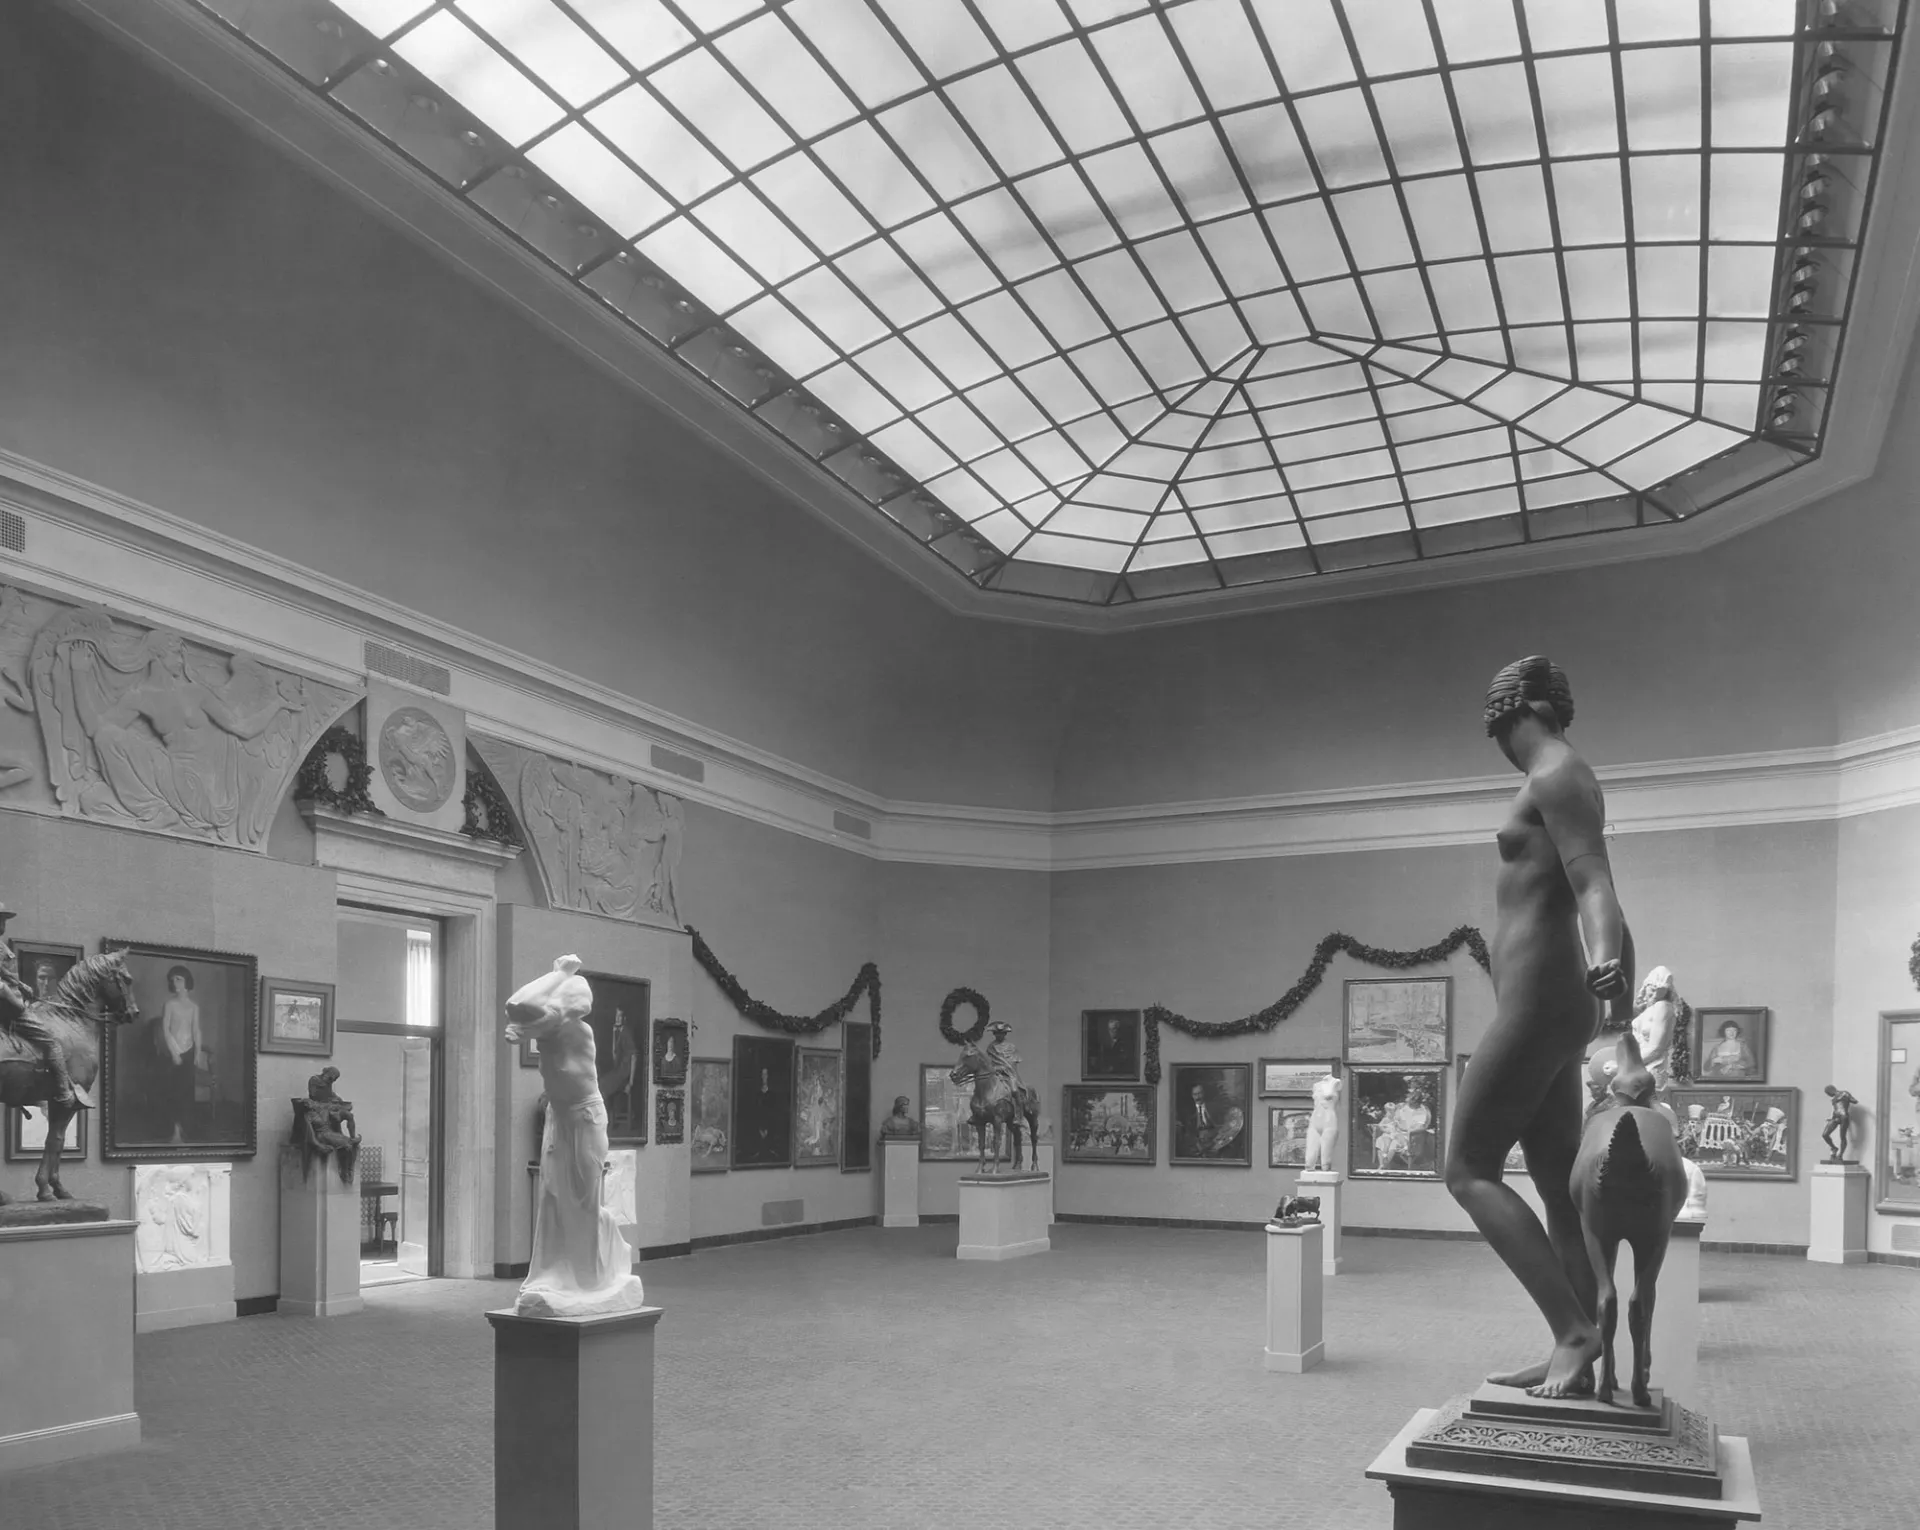 Sculptures and paintings installed in a large gallery whose ceiling is a skylight. Garlands of greenery also adorn the walls.